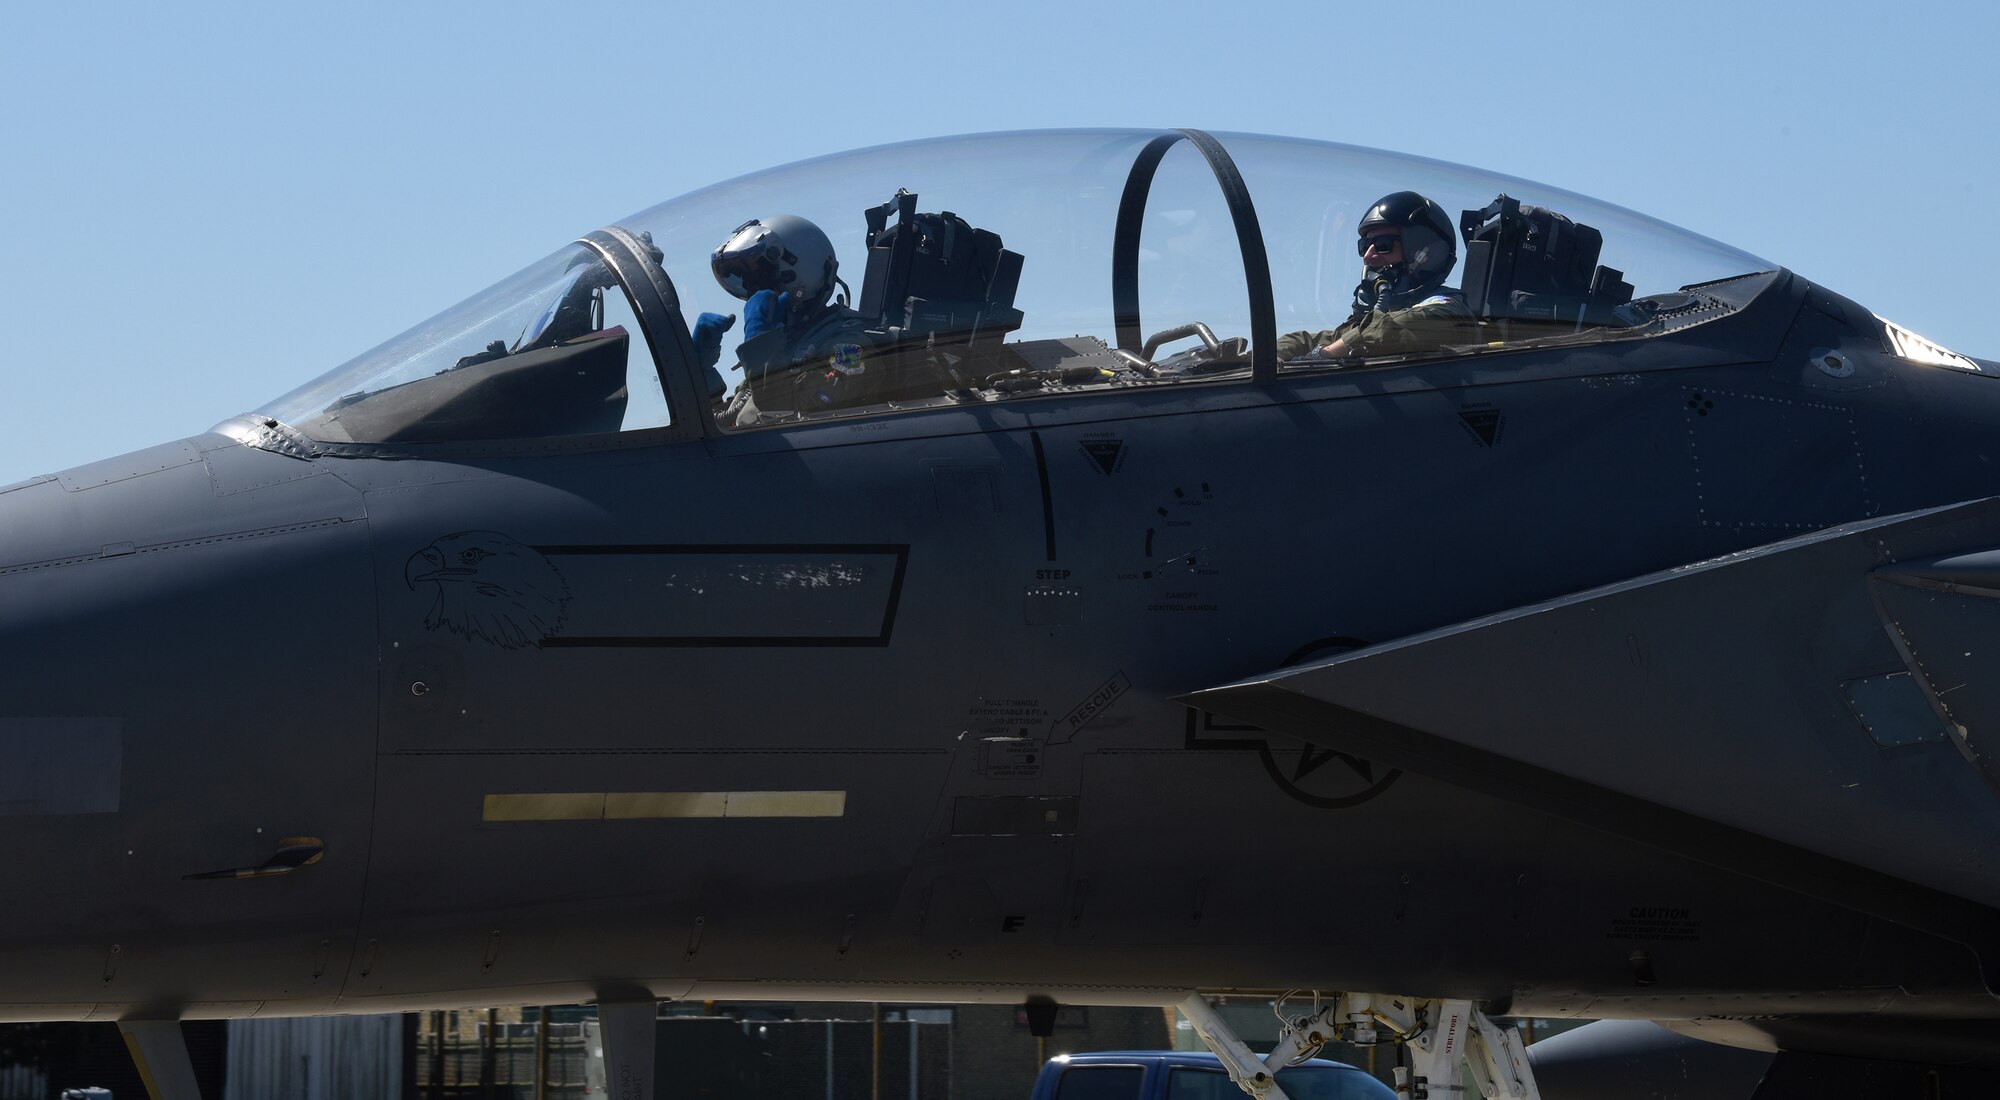 An F-15E Strike Eagle aircrew assigned to the 494th Fighter Squadron prepares to take off for exercise Point Blank 19-2 at Royal Air Force Lakenheath, England, June 27, 2019. U.S. personnel from RAF Lakenheath and RAF Mildenhall, England, along with military members from the U.K. and France participated in the exercise, promoting multinational cooperation. (U.S. Air Force photo by Airman 1st Class Rhonda Smith)